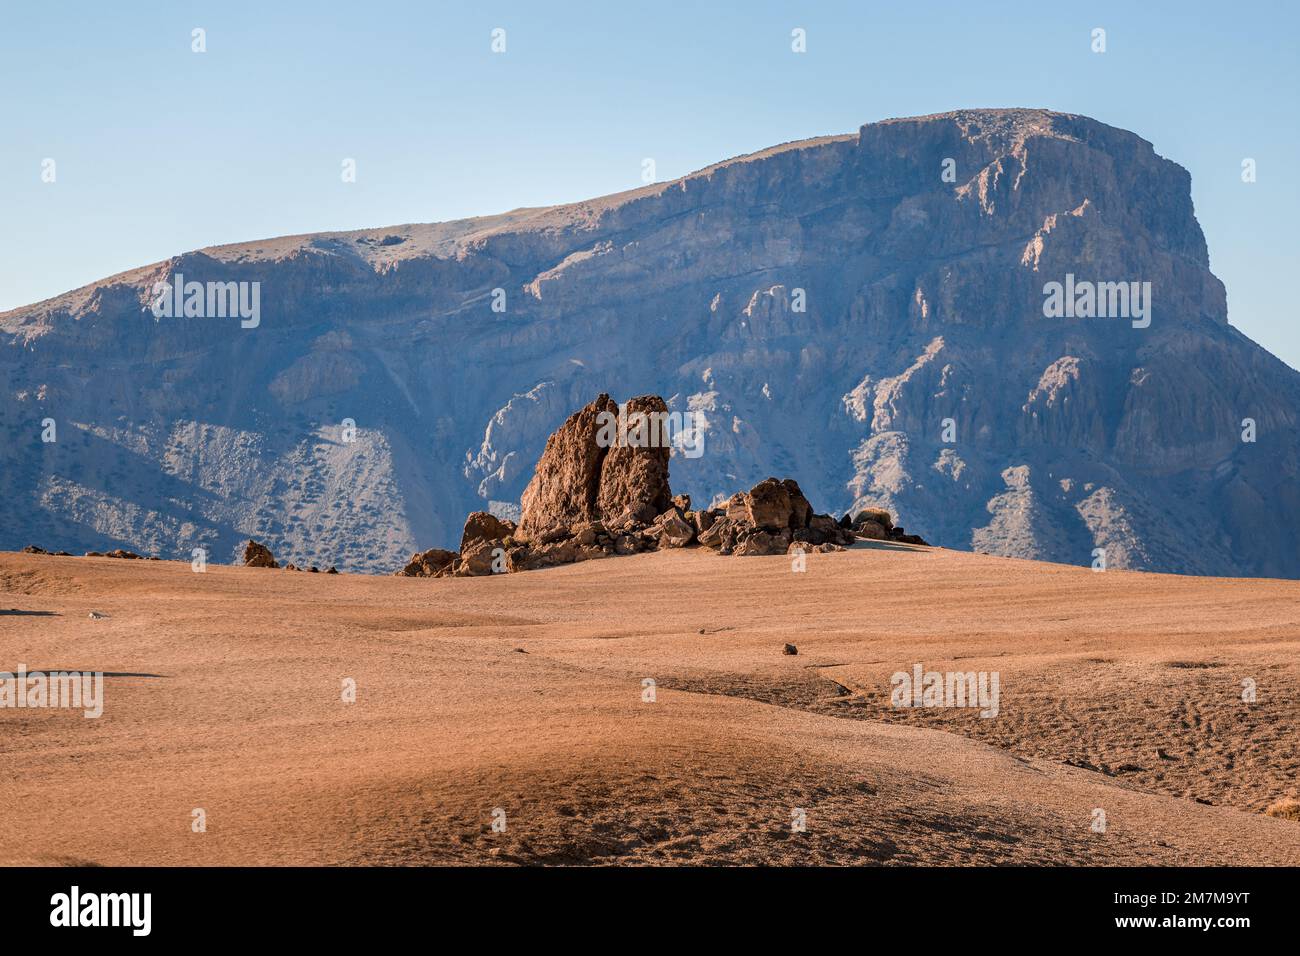 Empty orange sandy field with rocks in the background, resembling the landscape of Mars, beneath a clear blue morning sky Stock Photo